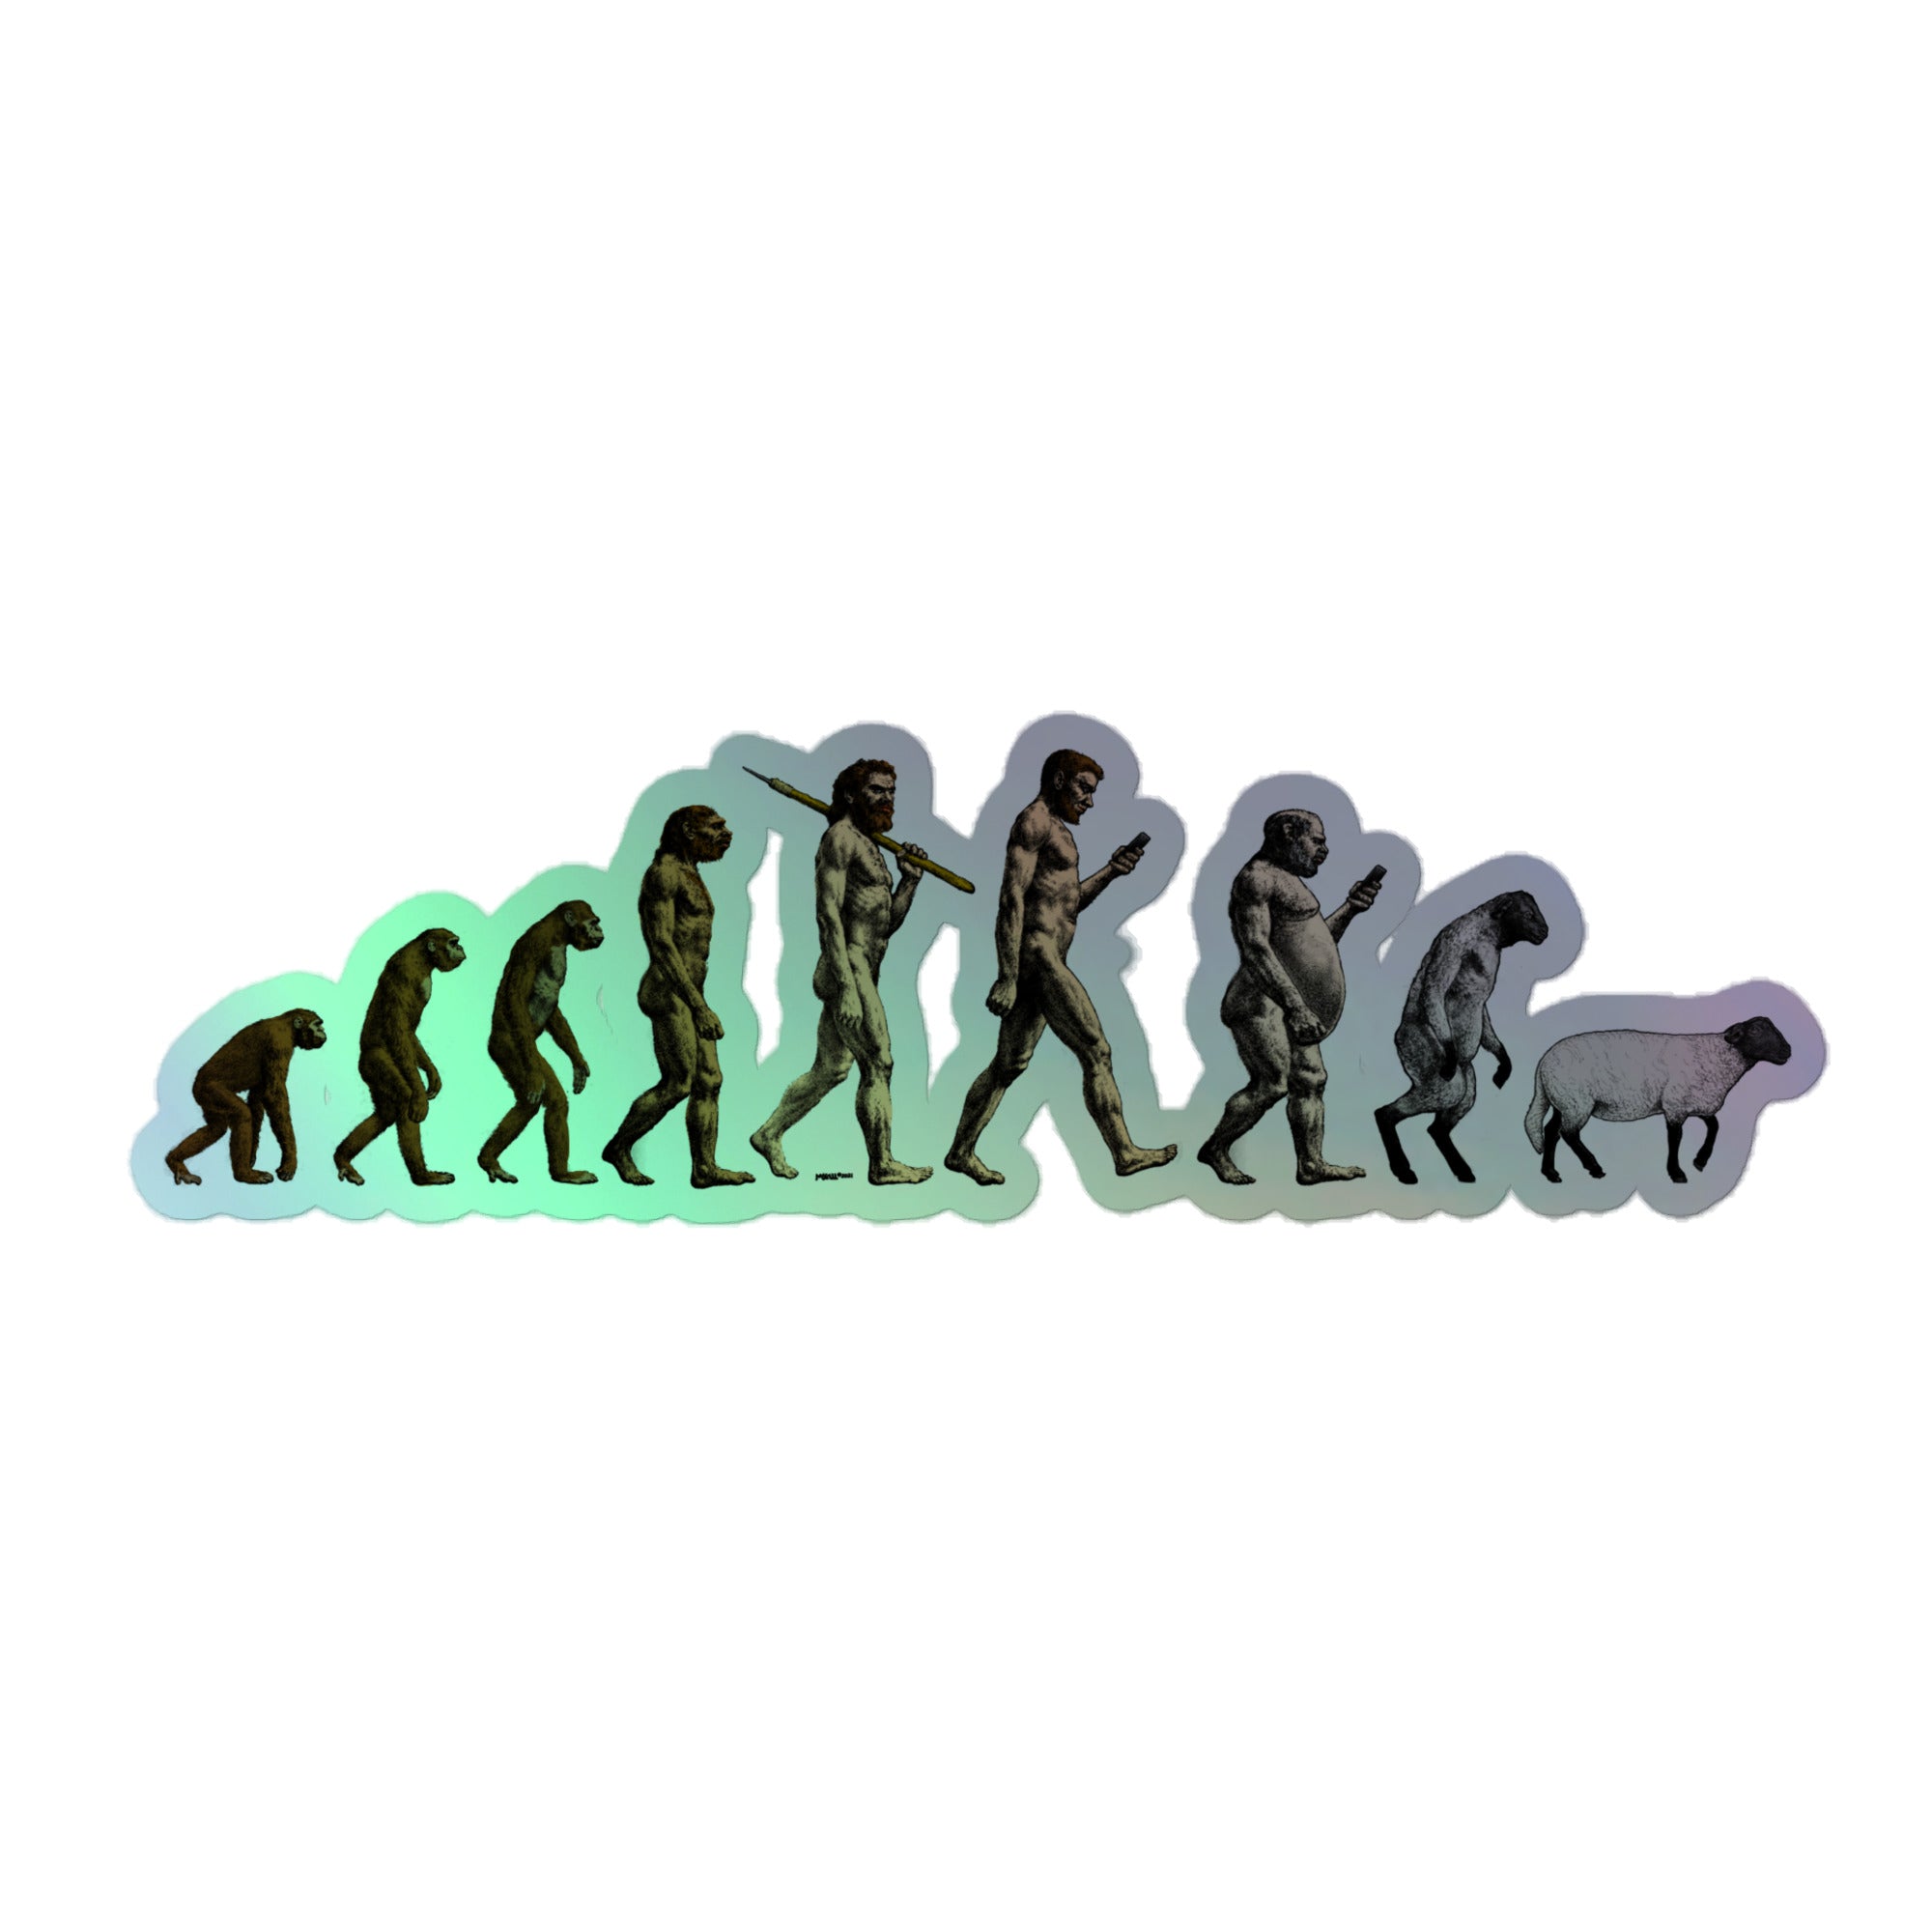 March of Modern Devolution Sheeple Holographic Stickers